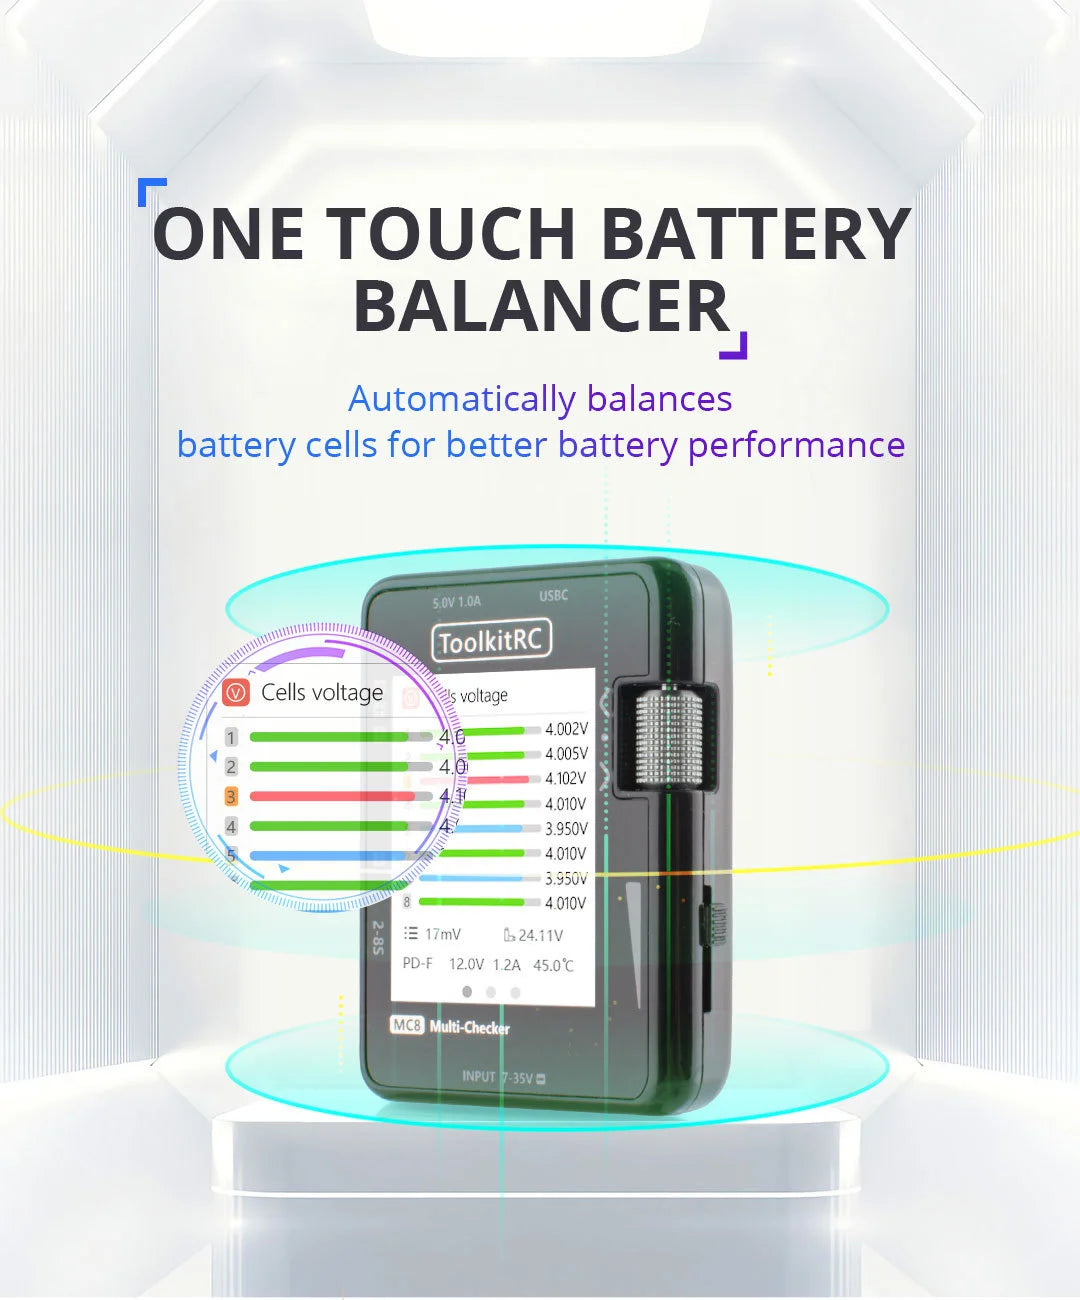 ToolkitRC MC8, ONE TOUCH BATTERY BALANCER automatically balances battery cells for better